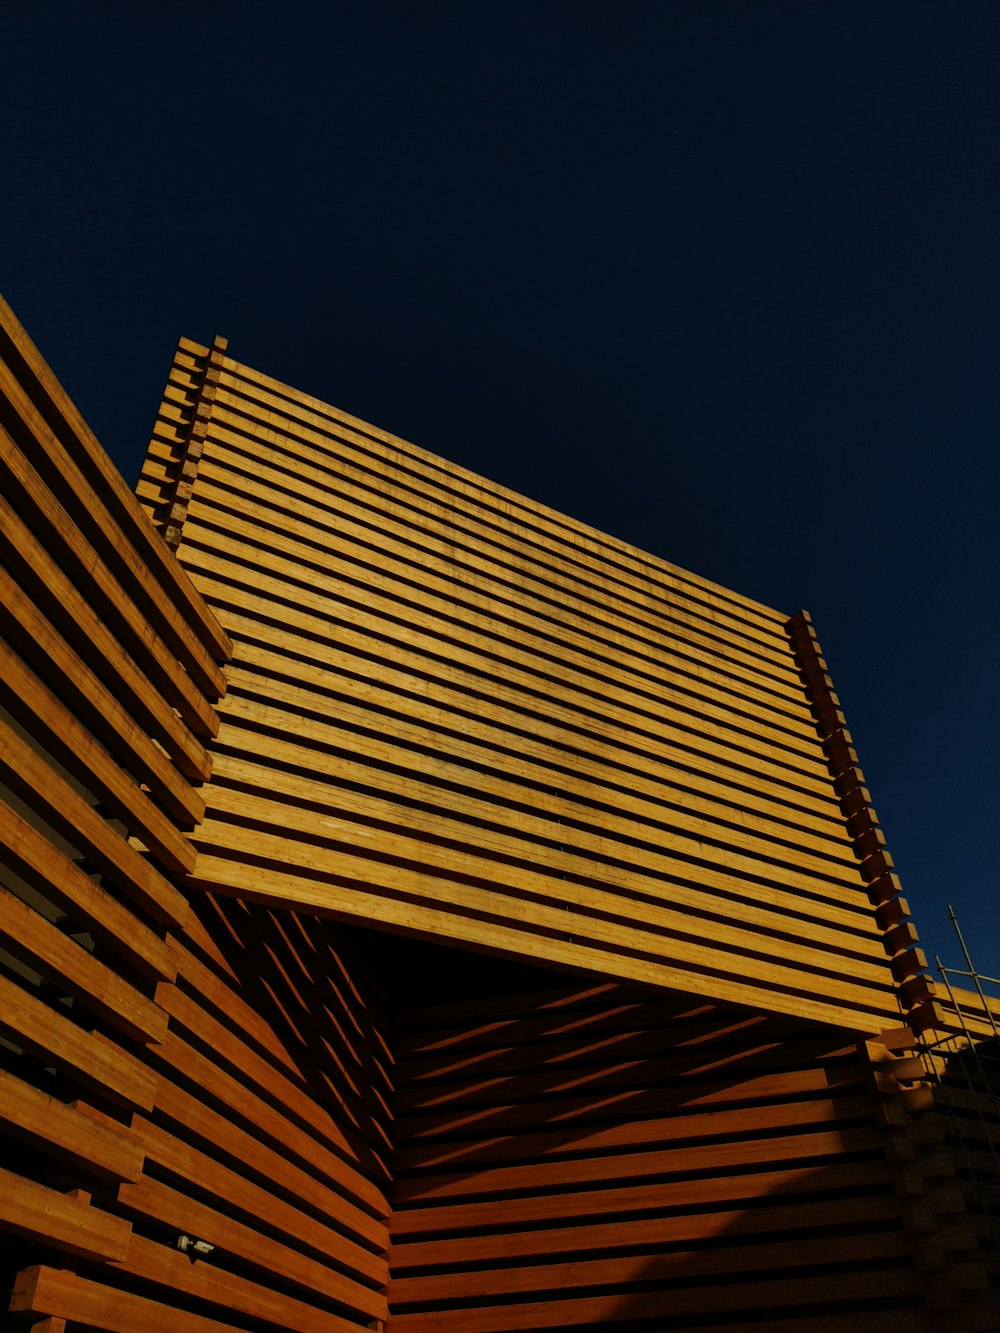 a building made of wooden slats against a blue sky